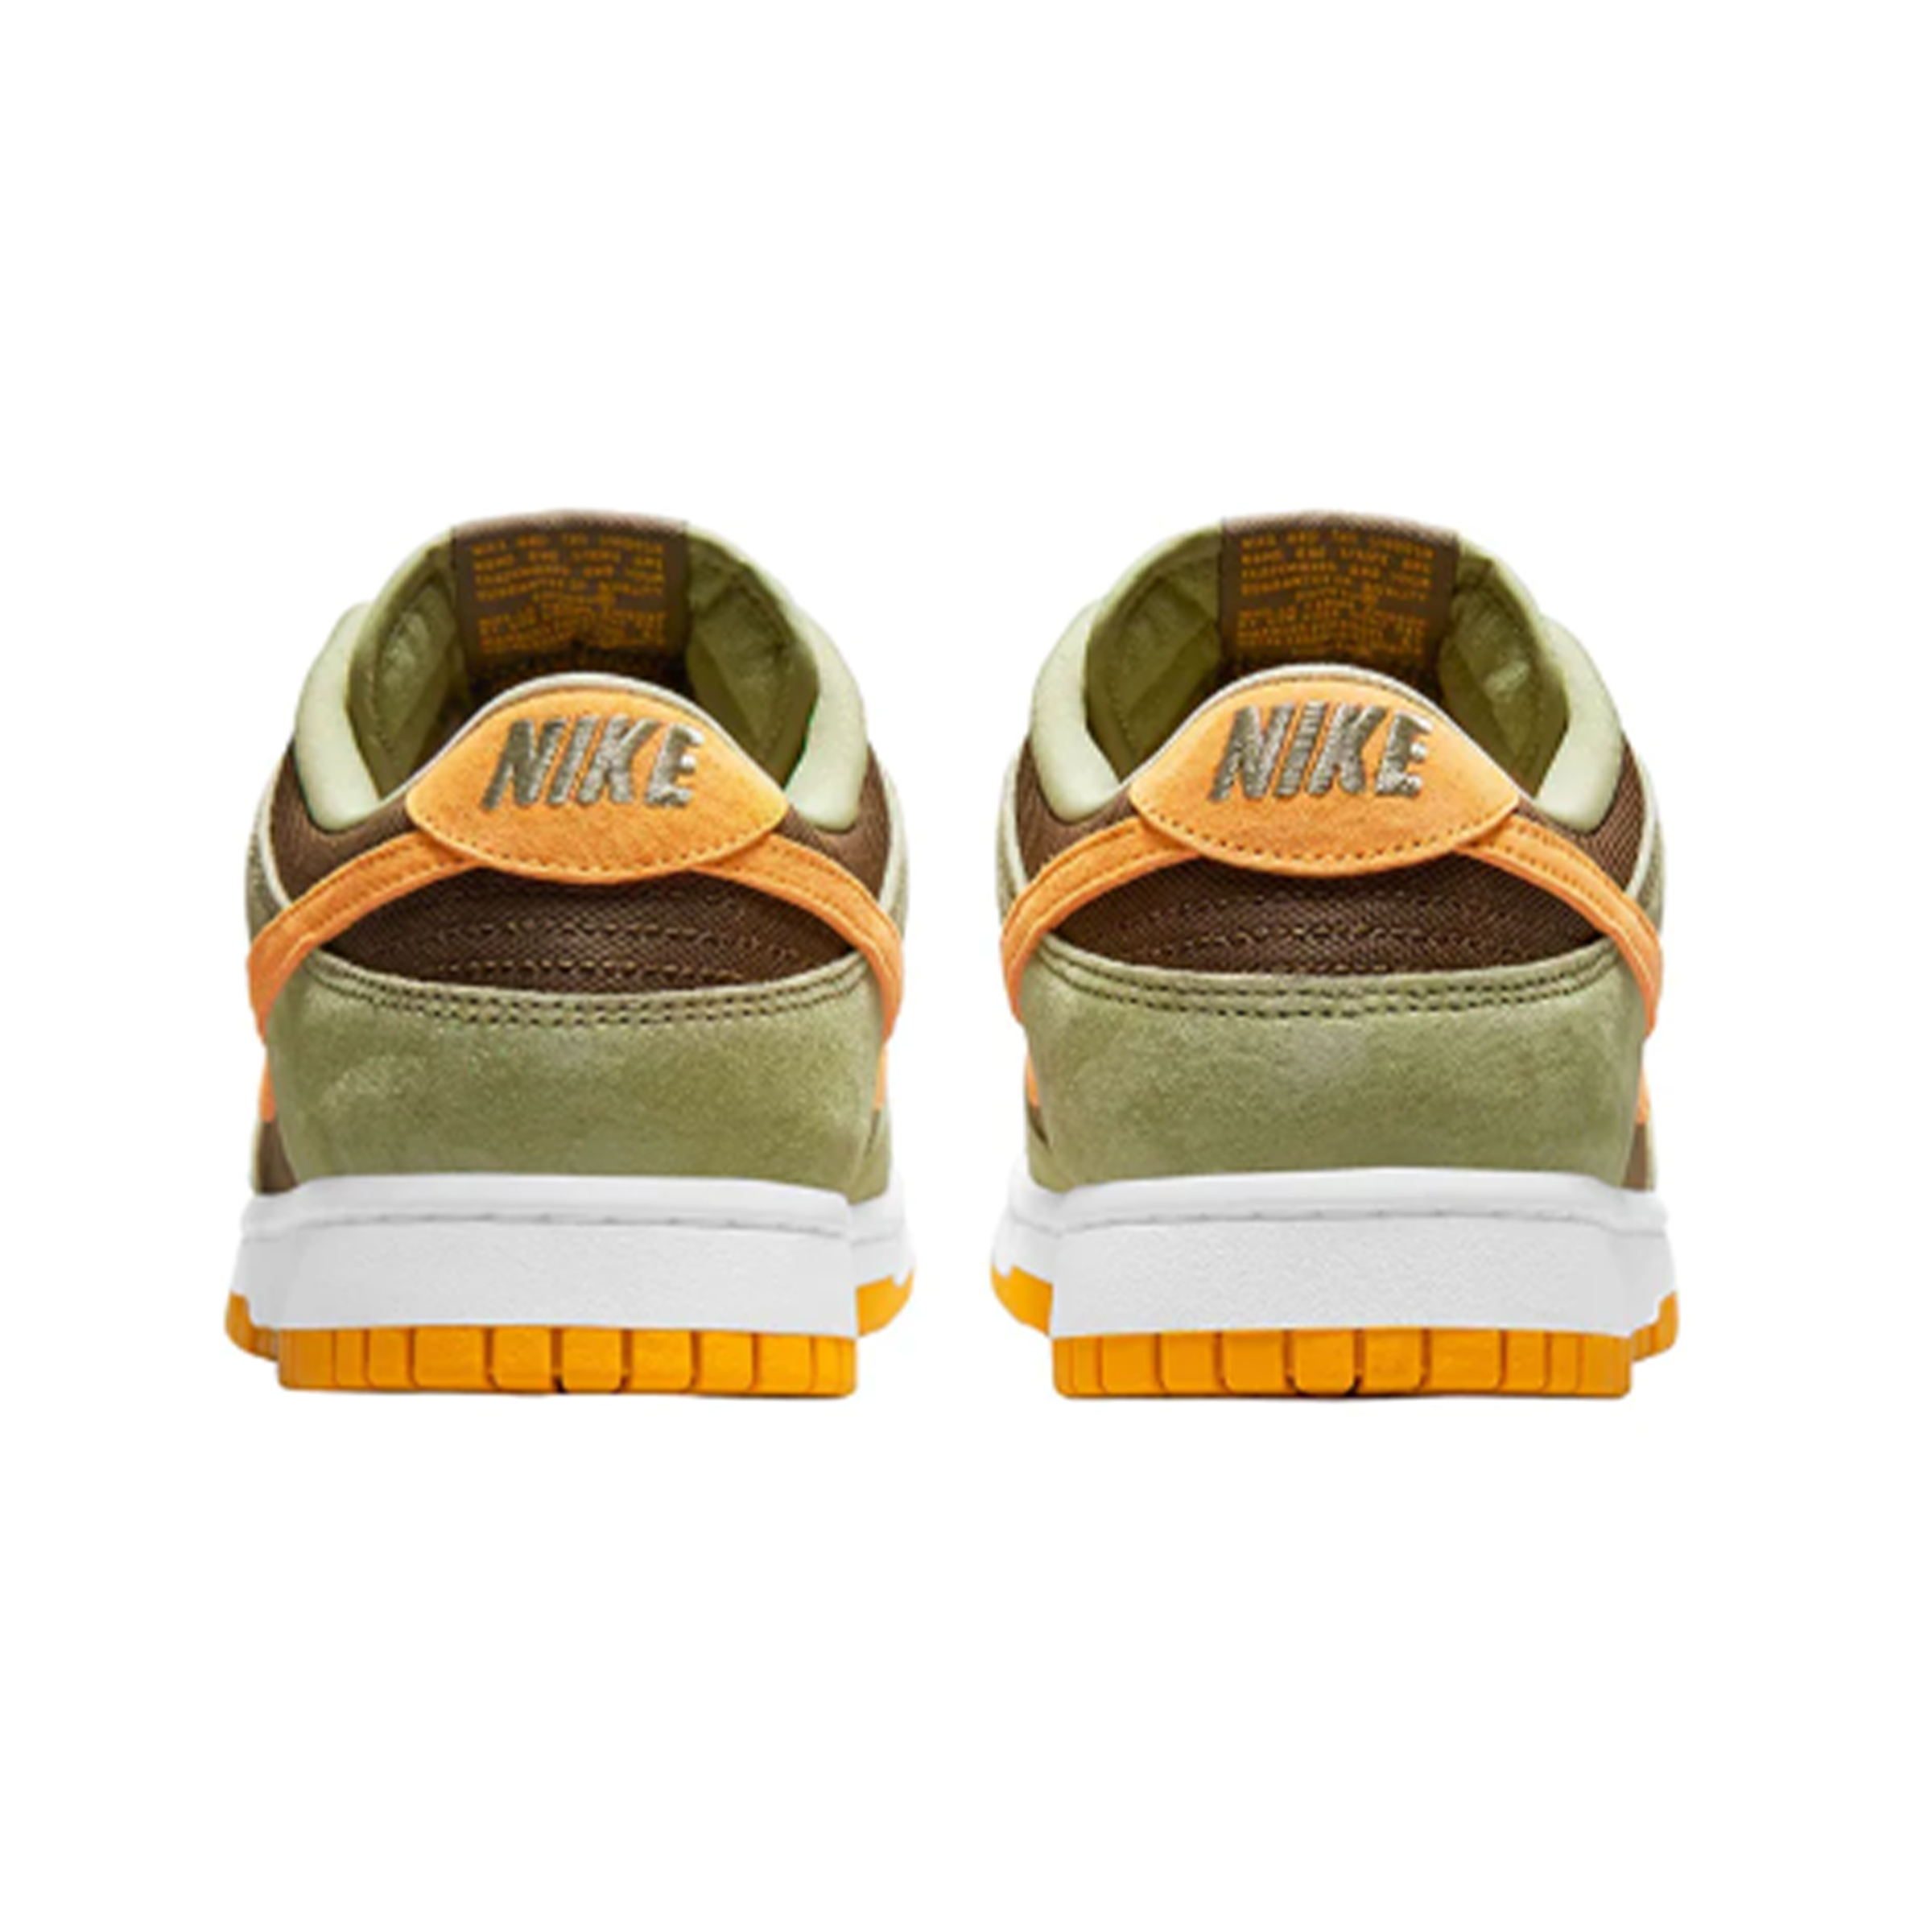 Nike Dunk Low - "Dusty Olive"